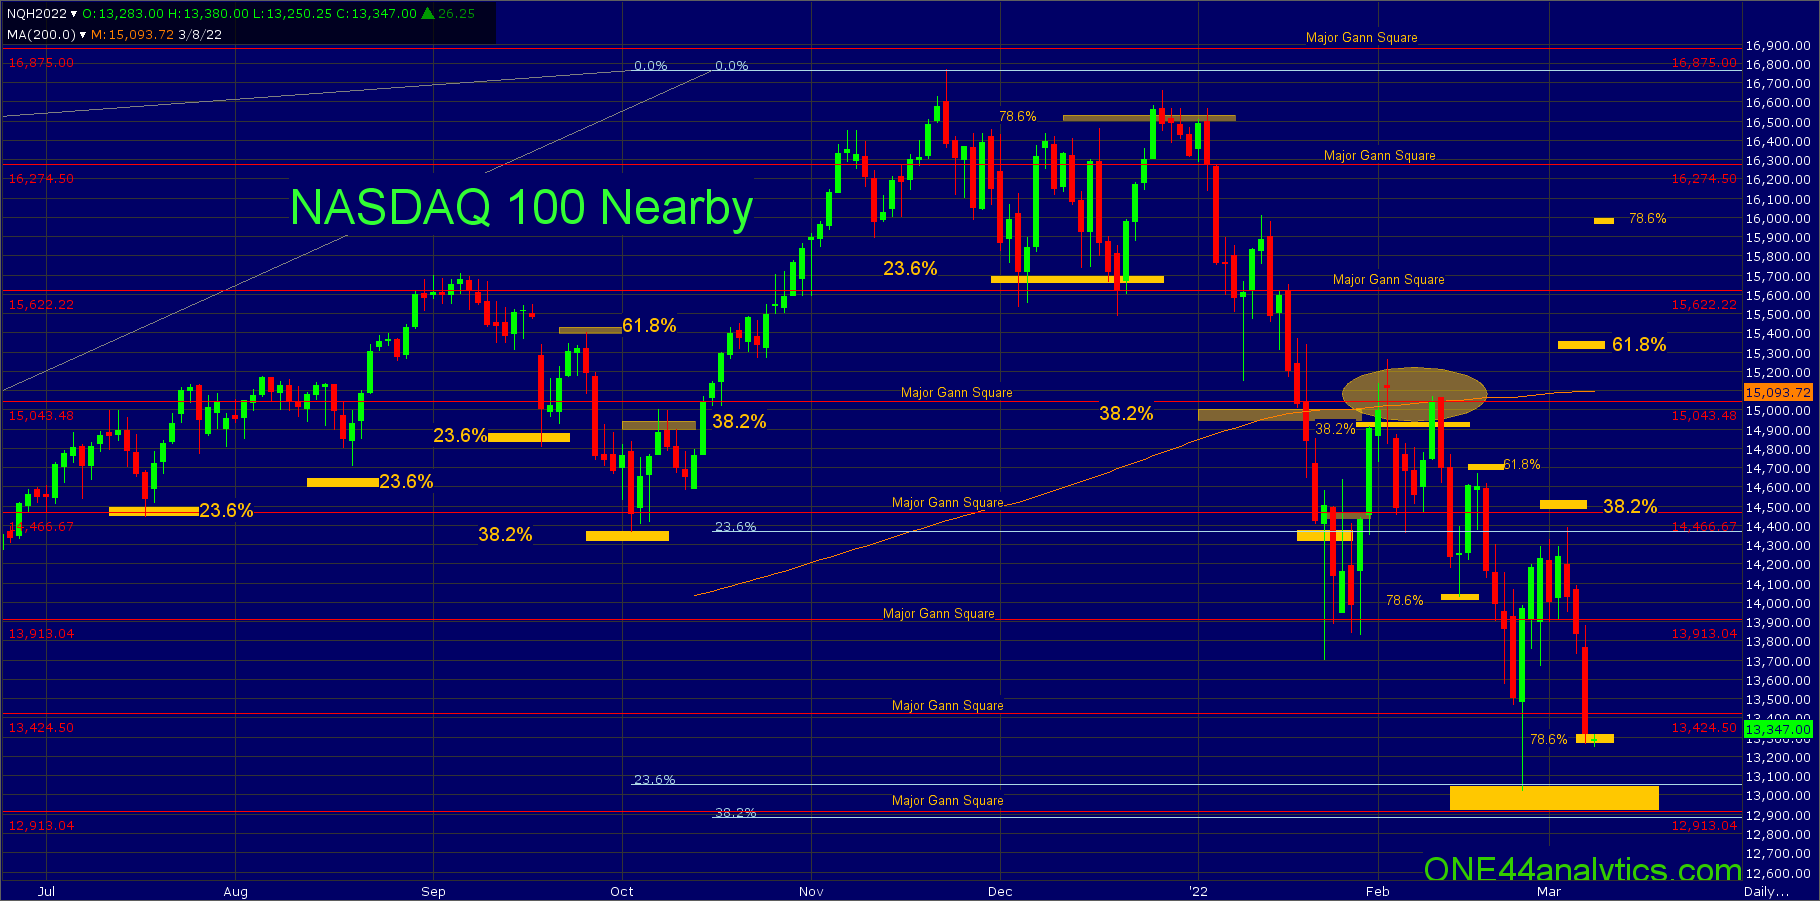 NASDAQ 100, is this the start of a run up to 15,300